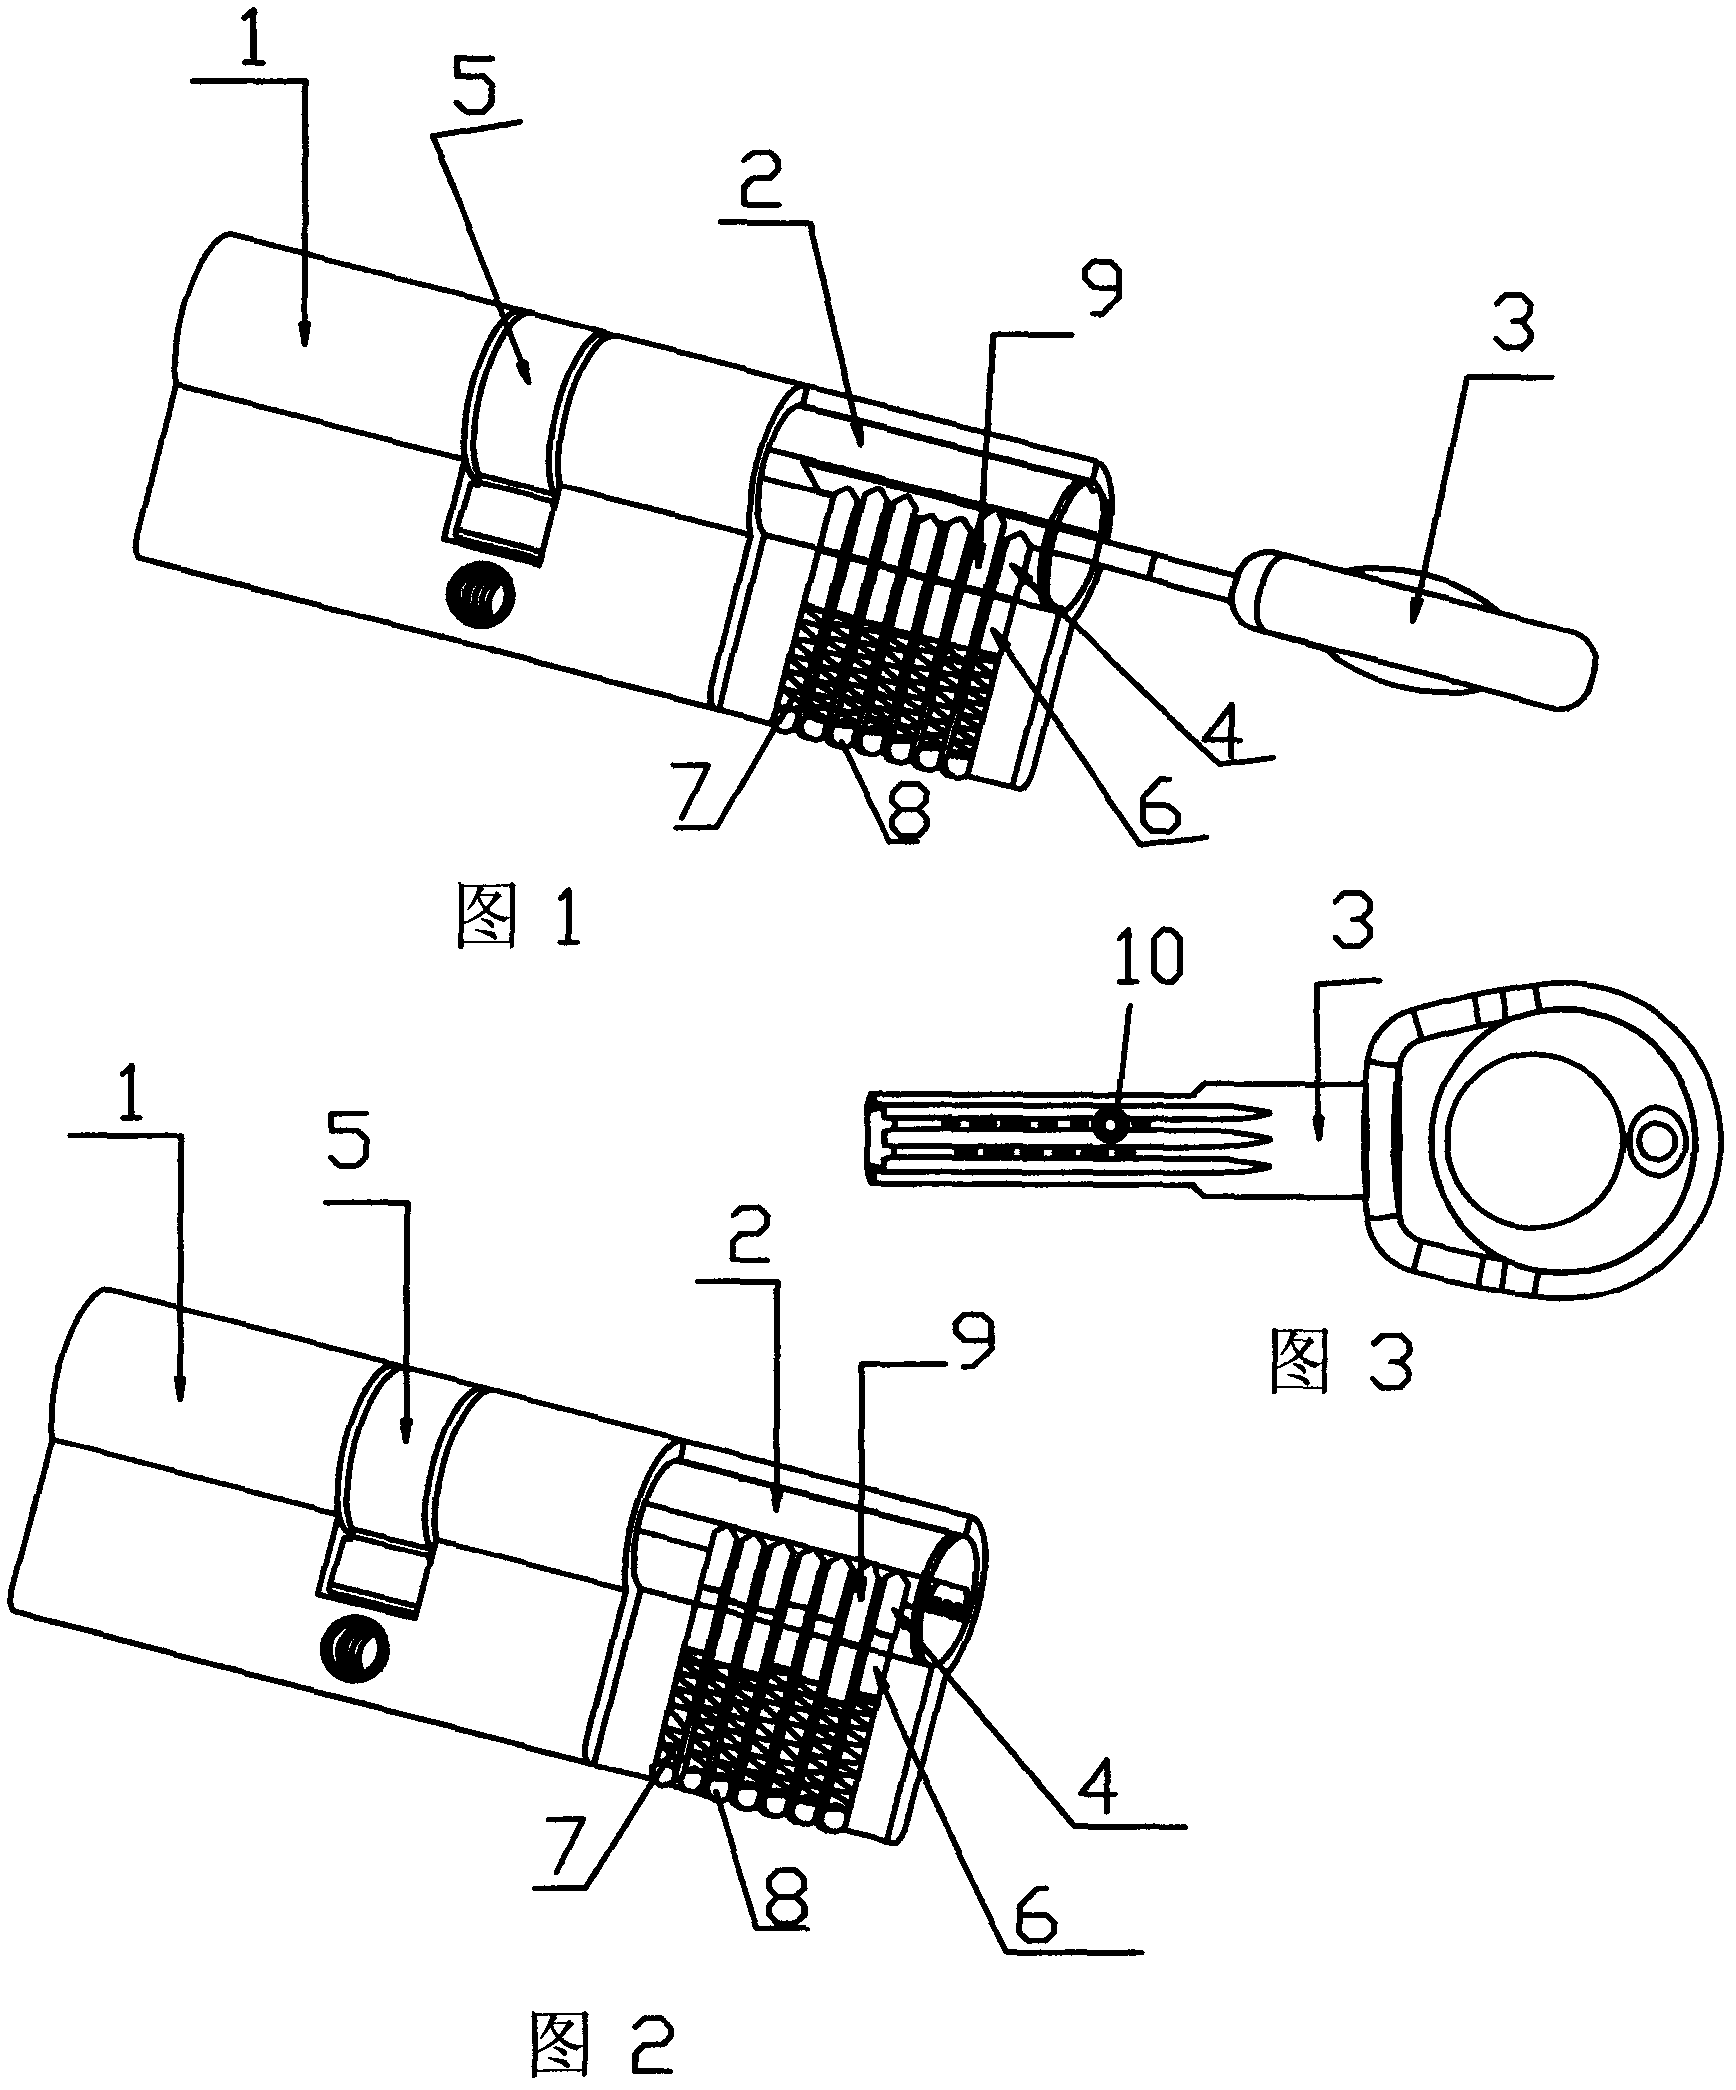 Lock cylinder capable of opening and closing